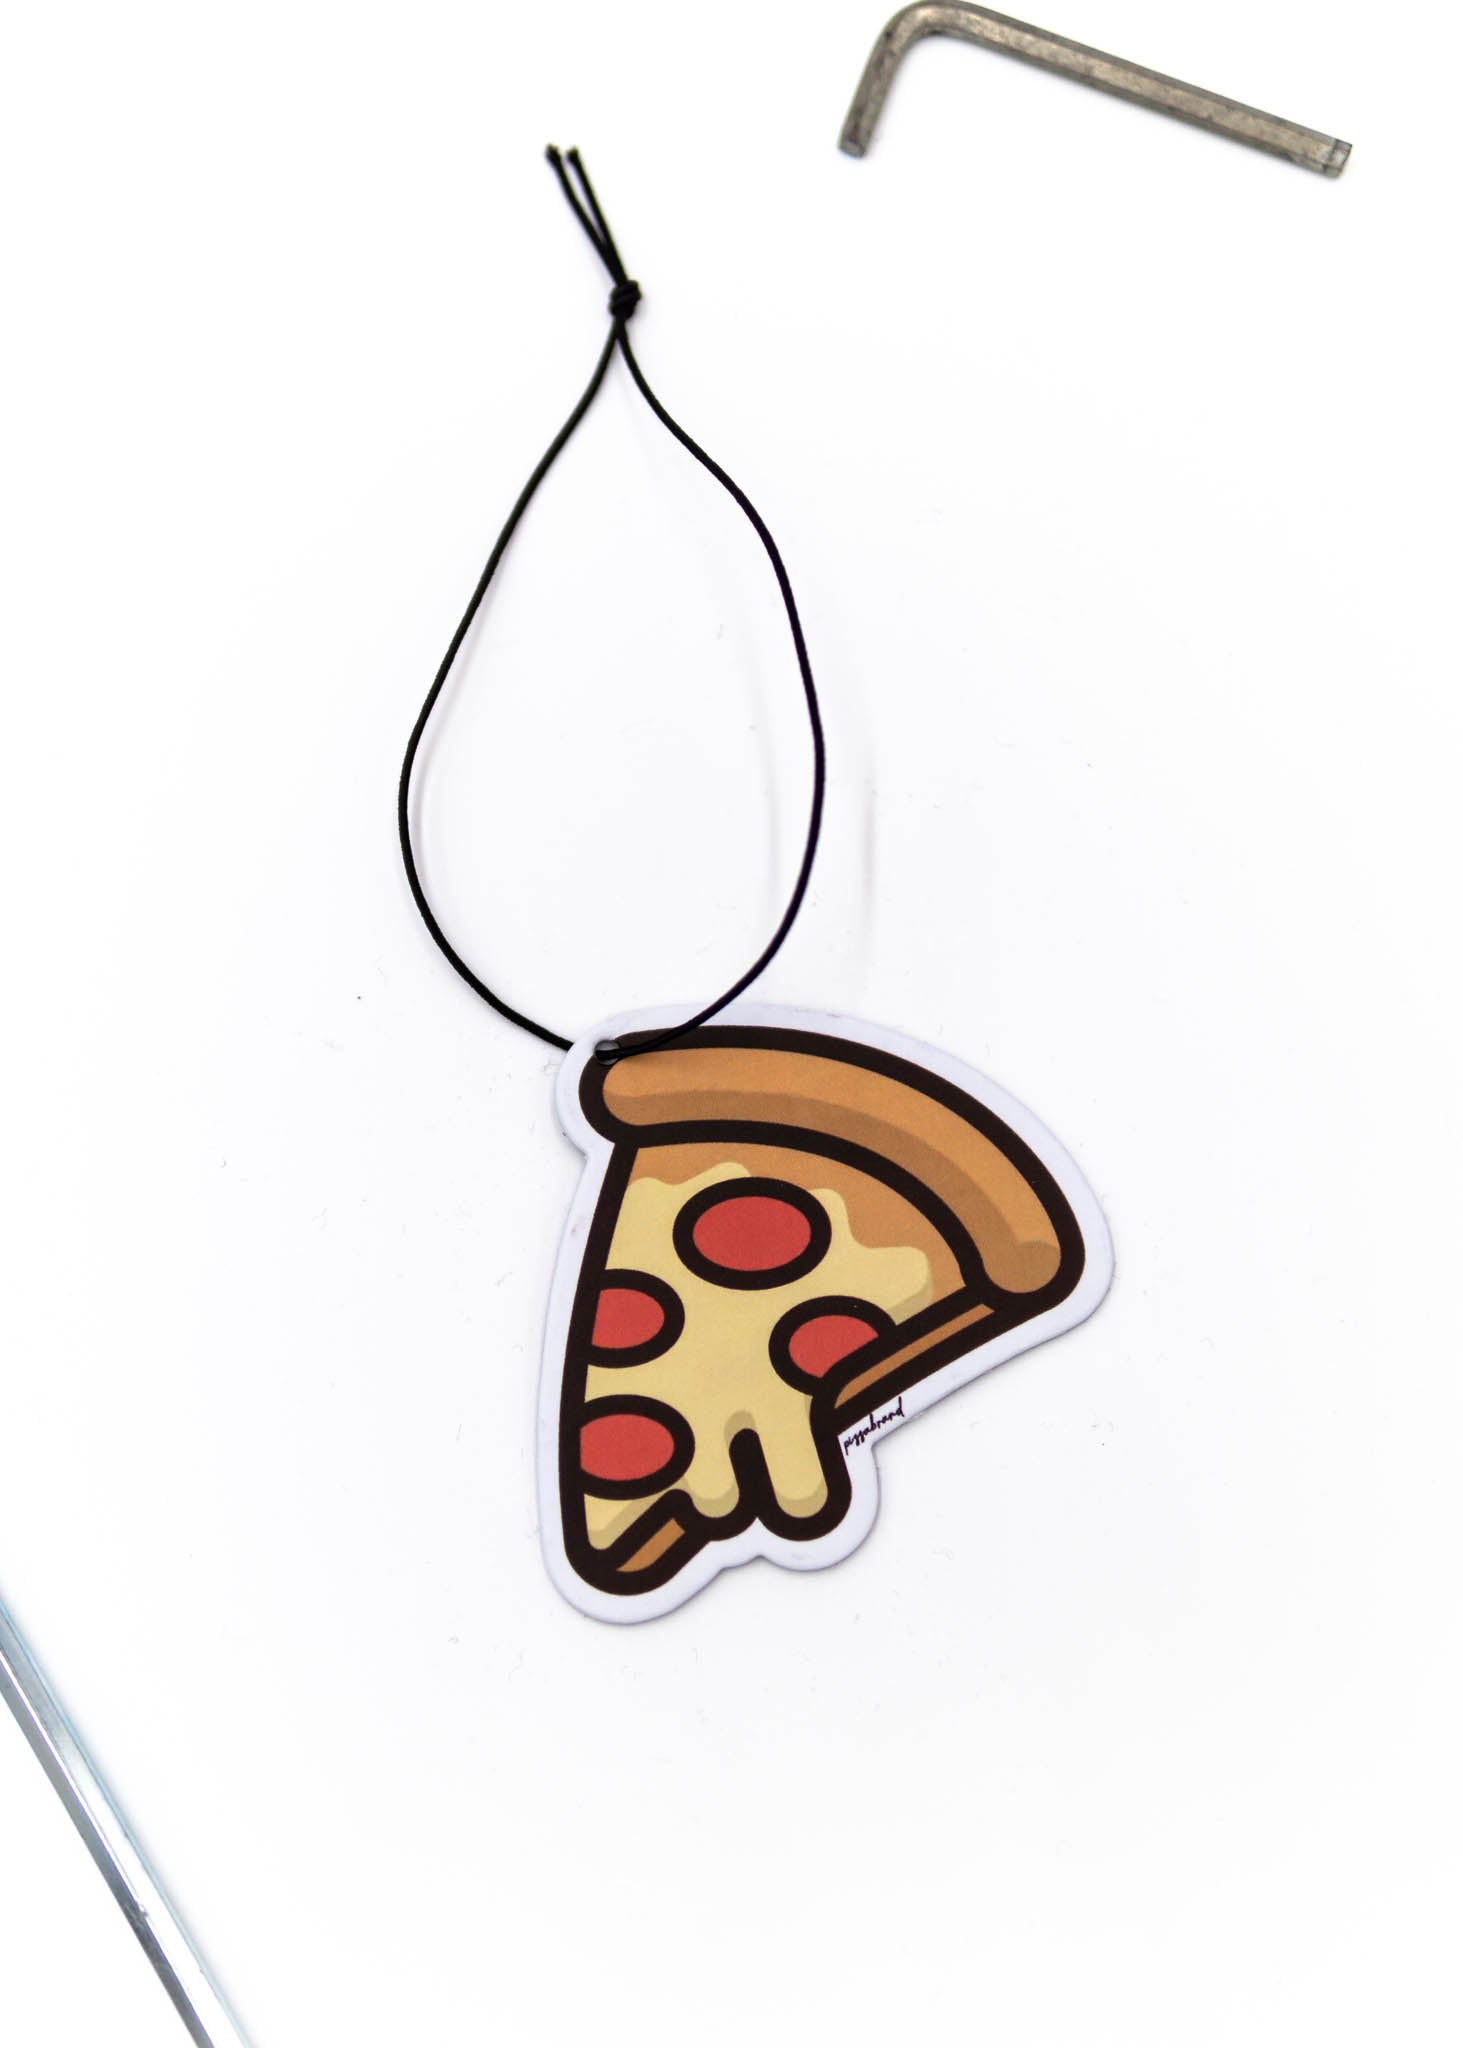 A pizzabrand pepperoni pizza air freshener. Photo is a close up of the car air freshener with string.